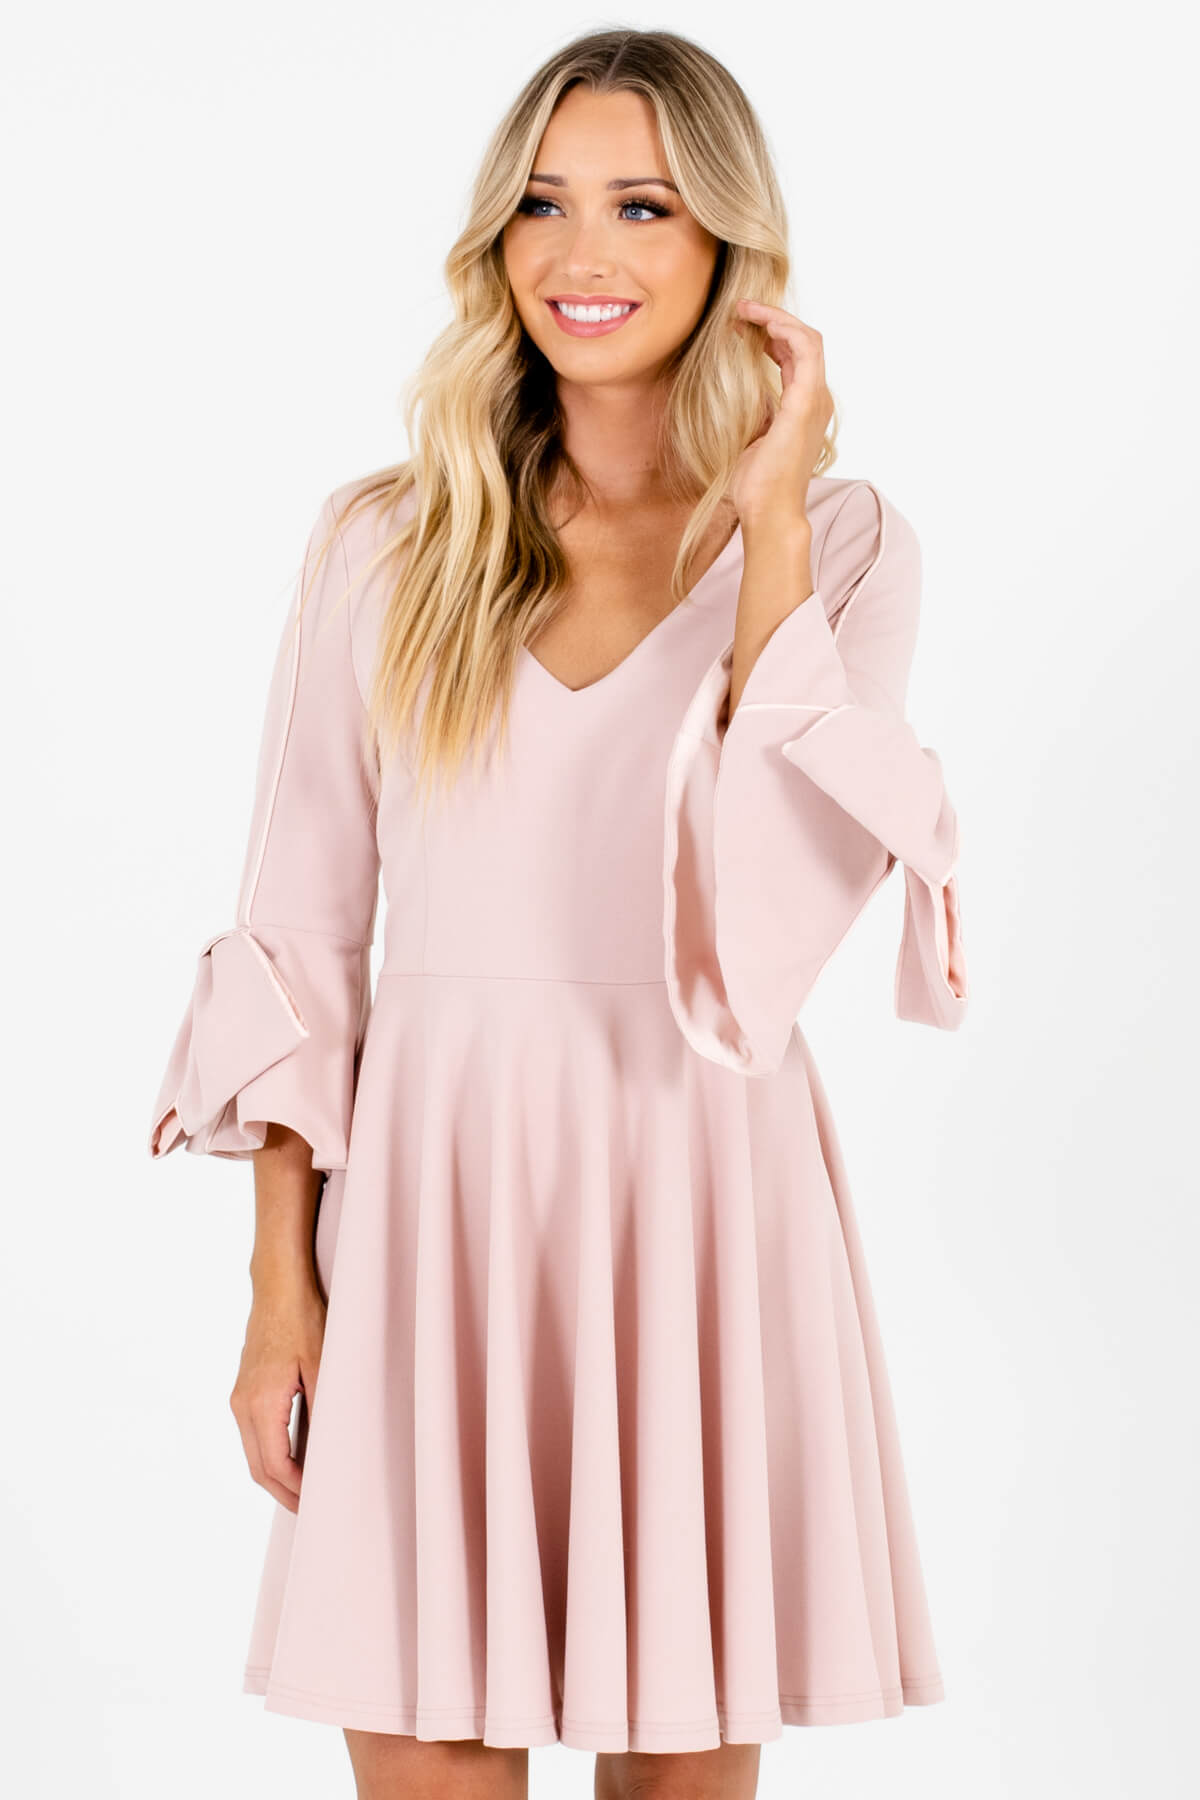 Blush Pink Thick Pleated Bow Sleeve Mini Dresses for Women